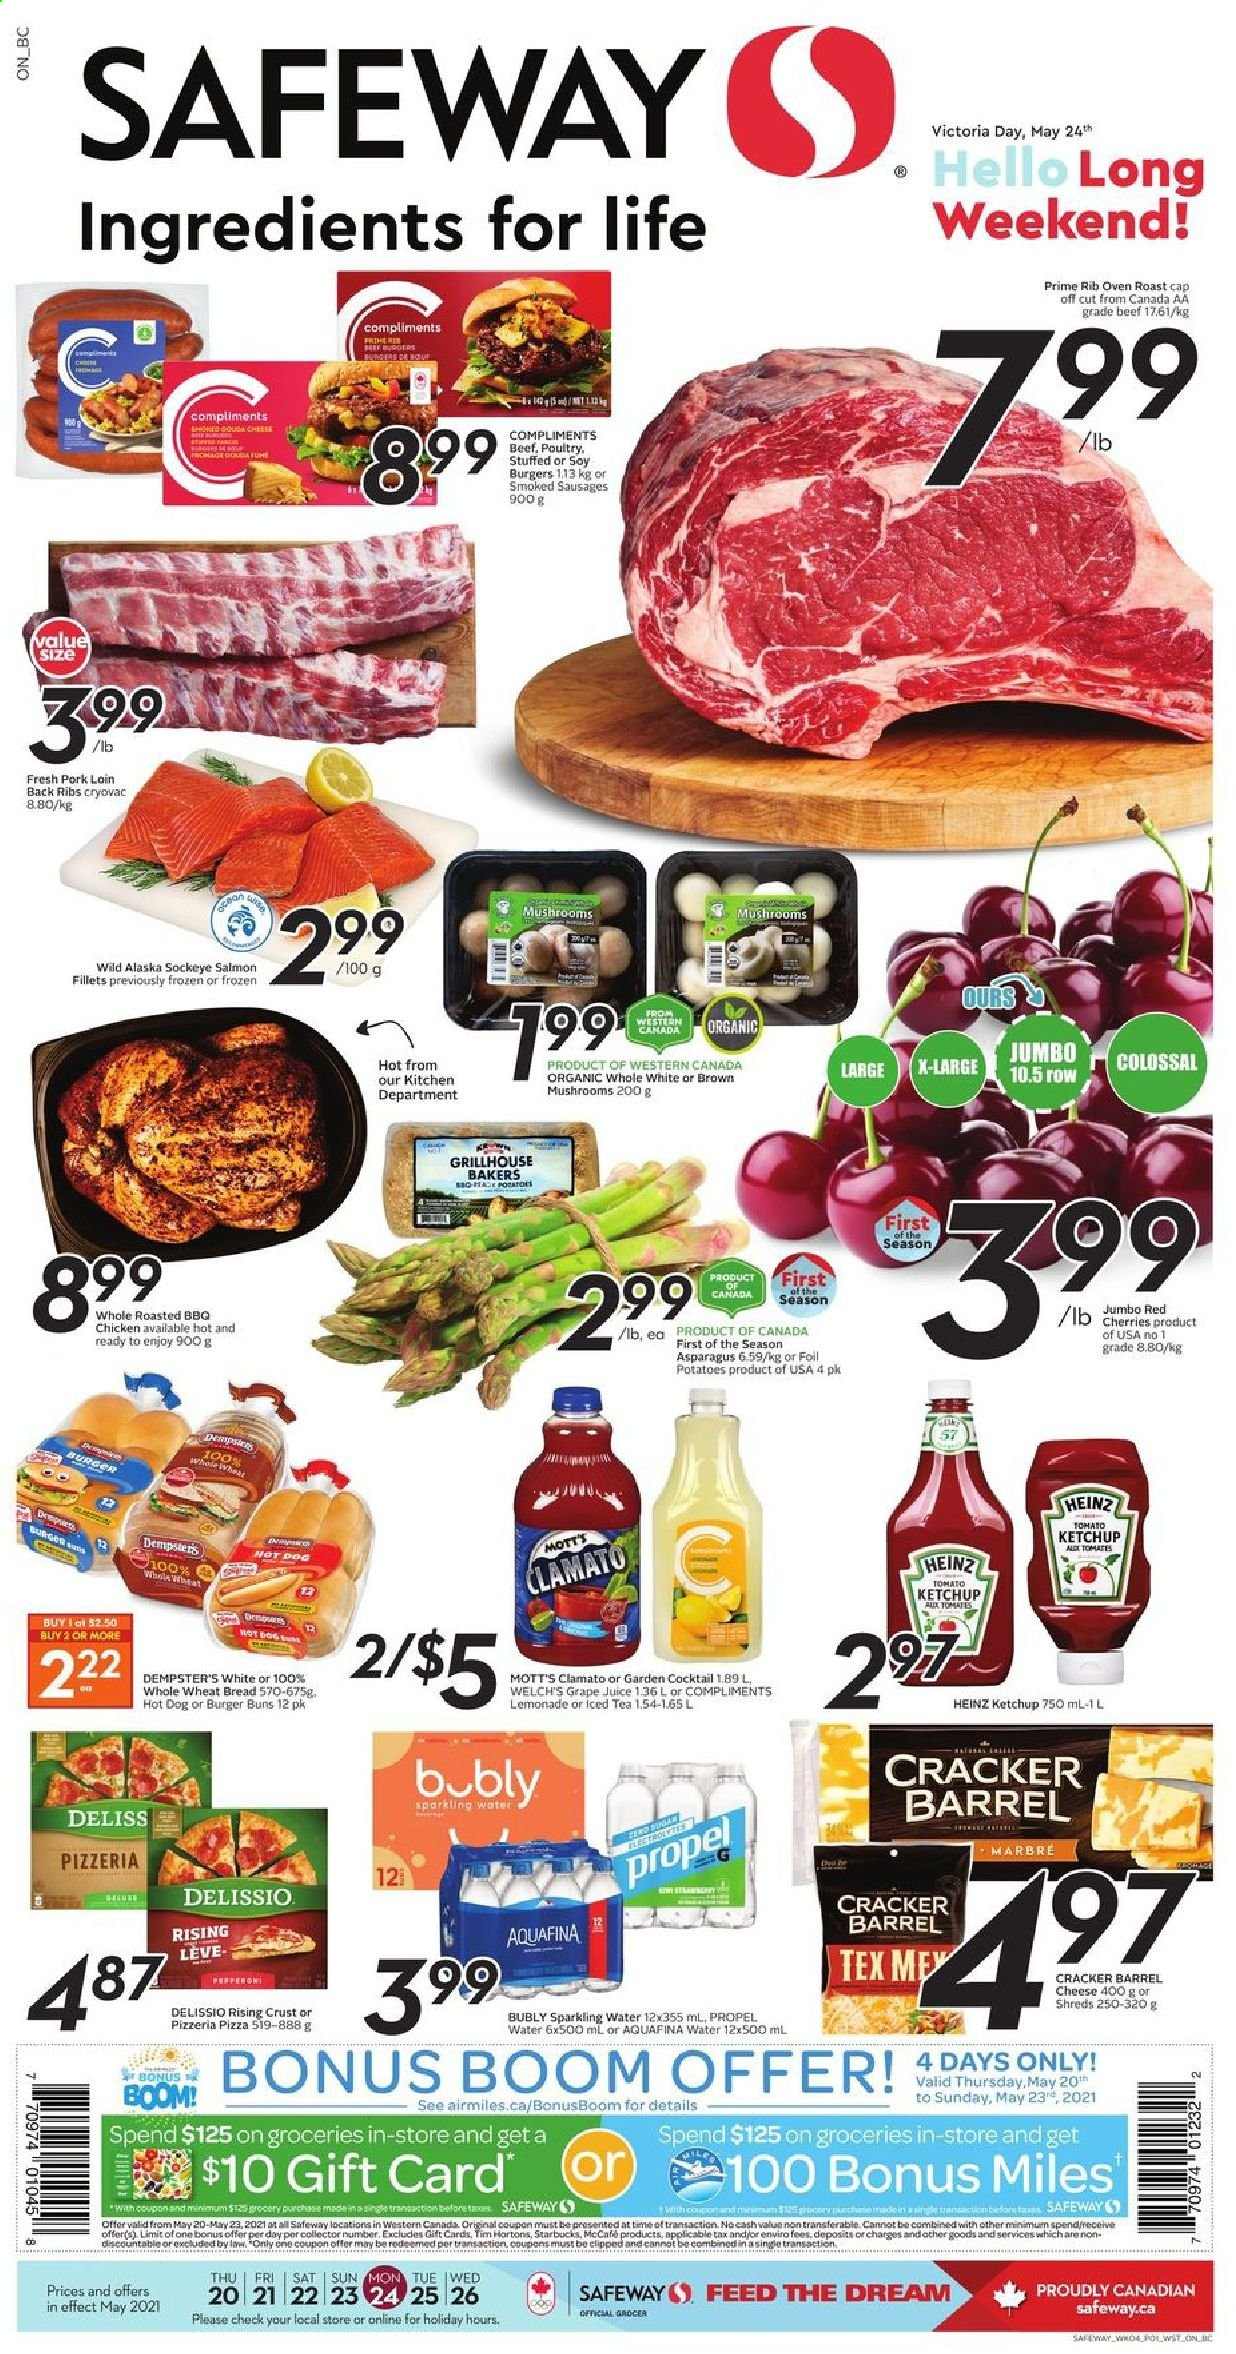 thumbnail - Safeway Flyer - May 20, 2021 - May 26, 2021 - Sales products - wheat bread, buns, burger buns, potatoes, cherries, Welch's, Mott's, fish fillets, salmon, salmon fillet, hot dog, roast, sausage, smoked sausage, gouda, ketchup, lemonade, tomato juice, juice, ice tea, Clamato, vegetable juice, Aquafina, flavored water, sparkling water, water, Starbucks, McCafe, ribs, Bakers, Heinz. Page 1.